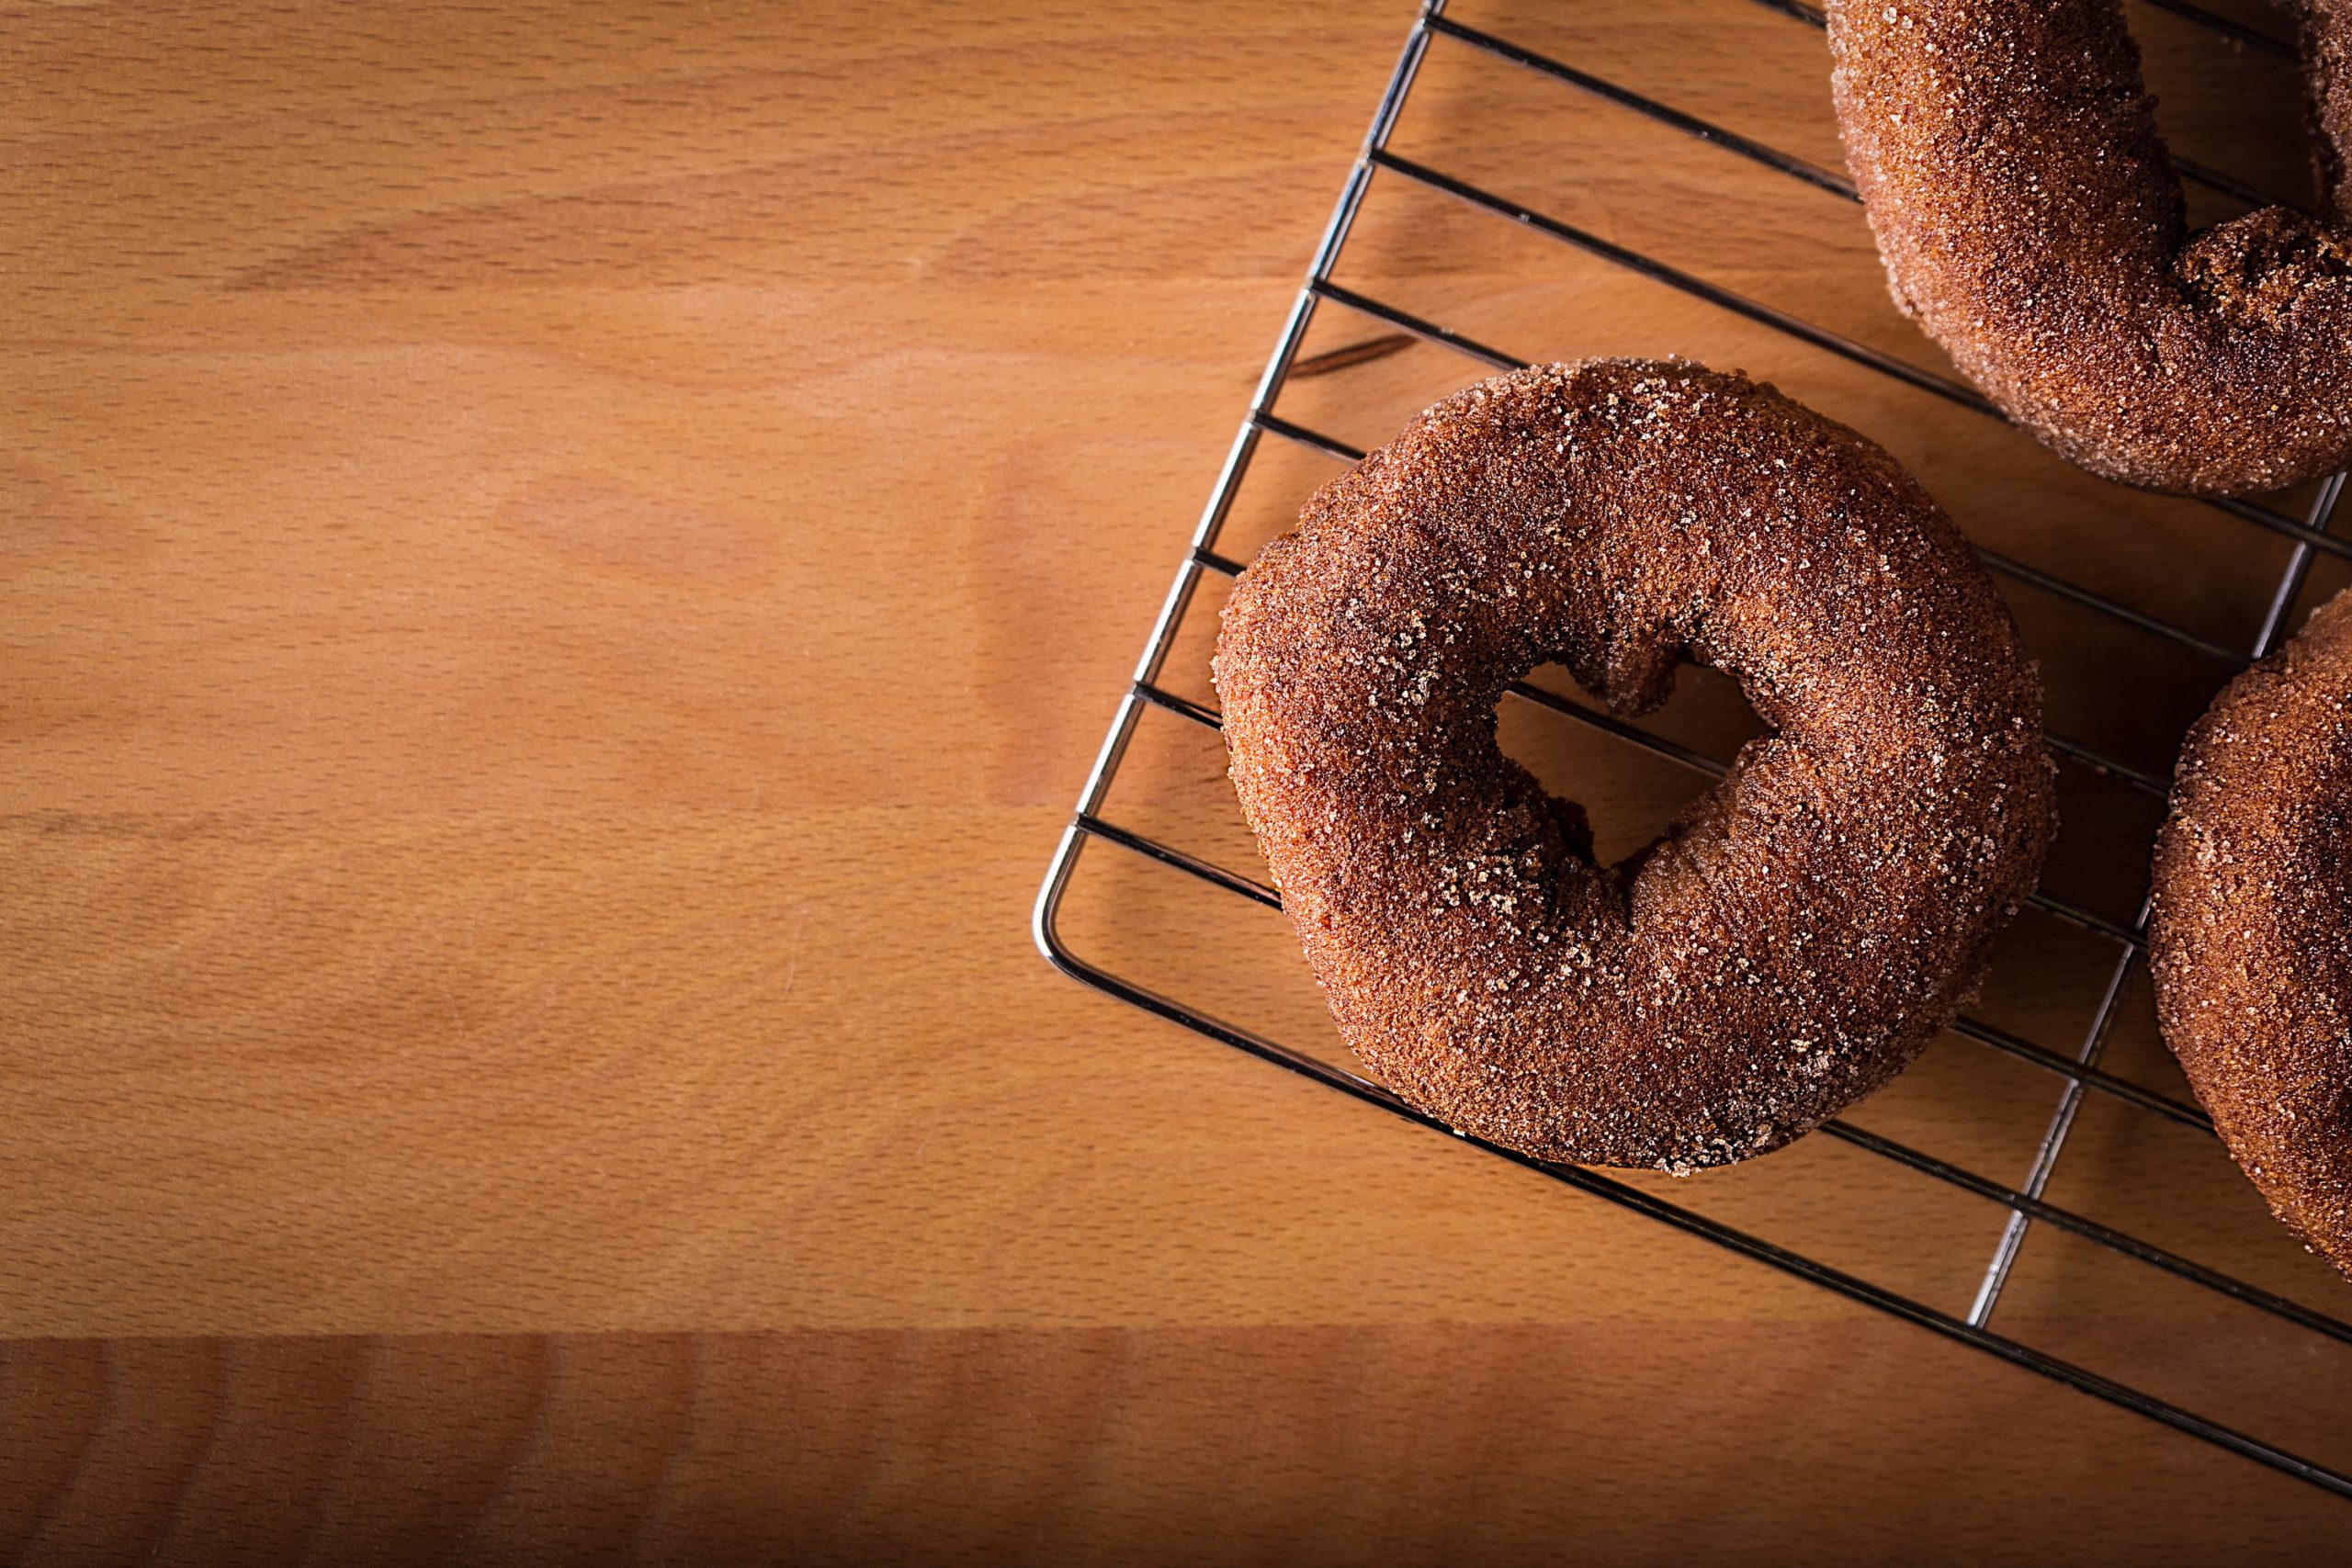 Doughnuts cooling on a cooling rack in article about free stuff for single moms